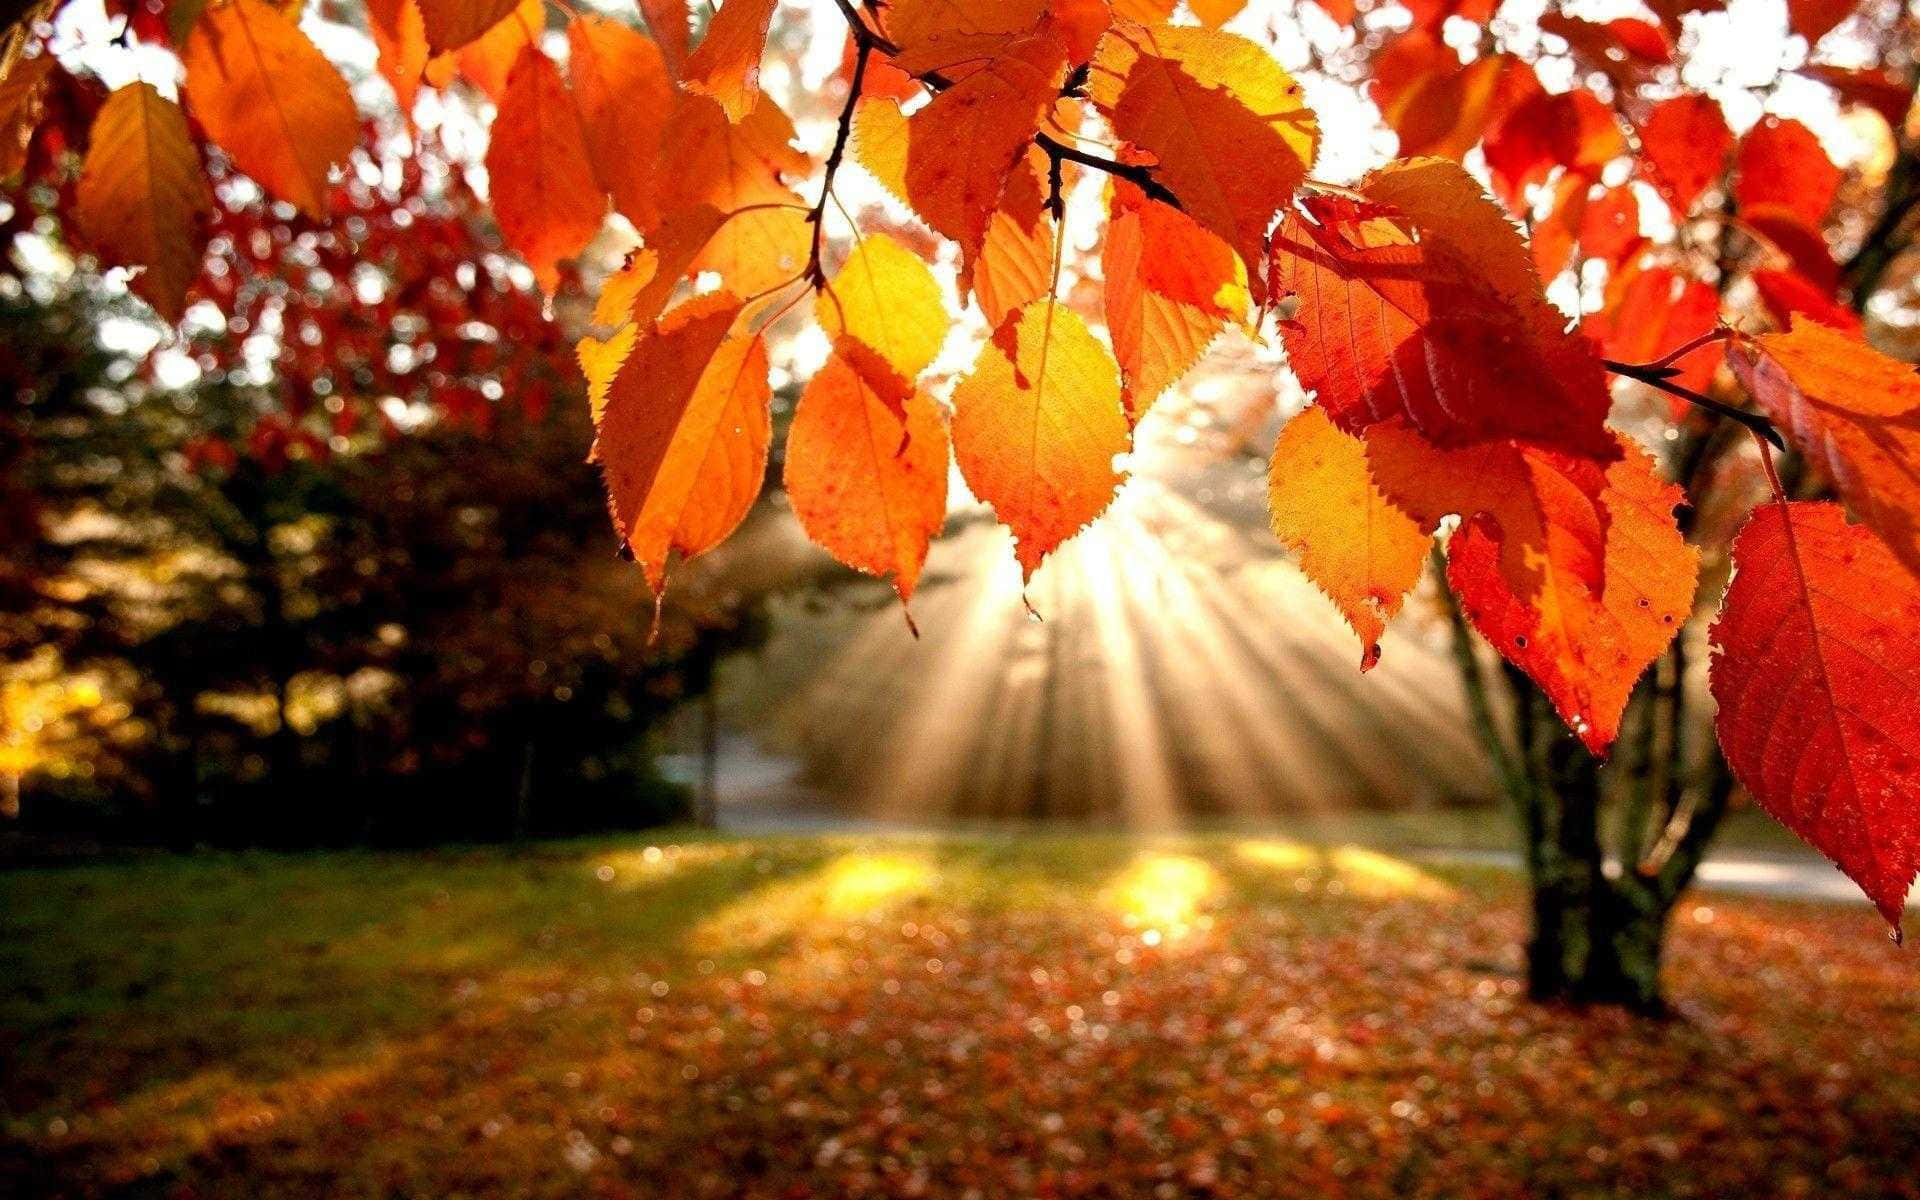 Enjoy the beauty and tranquility of autumn leaves